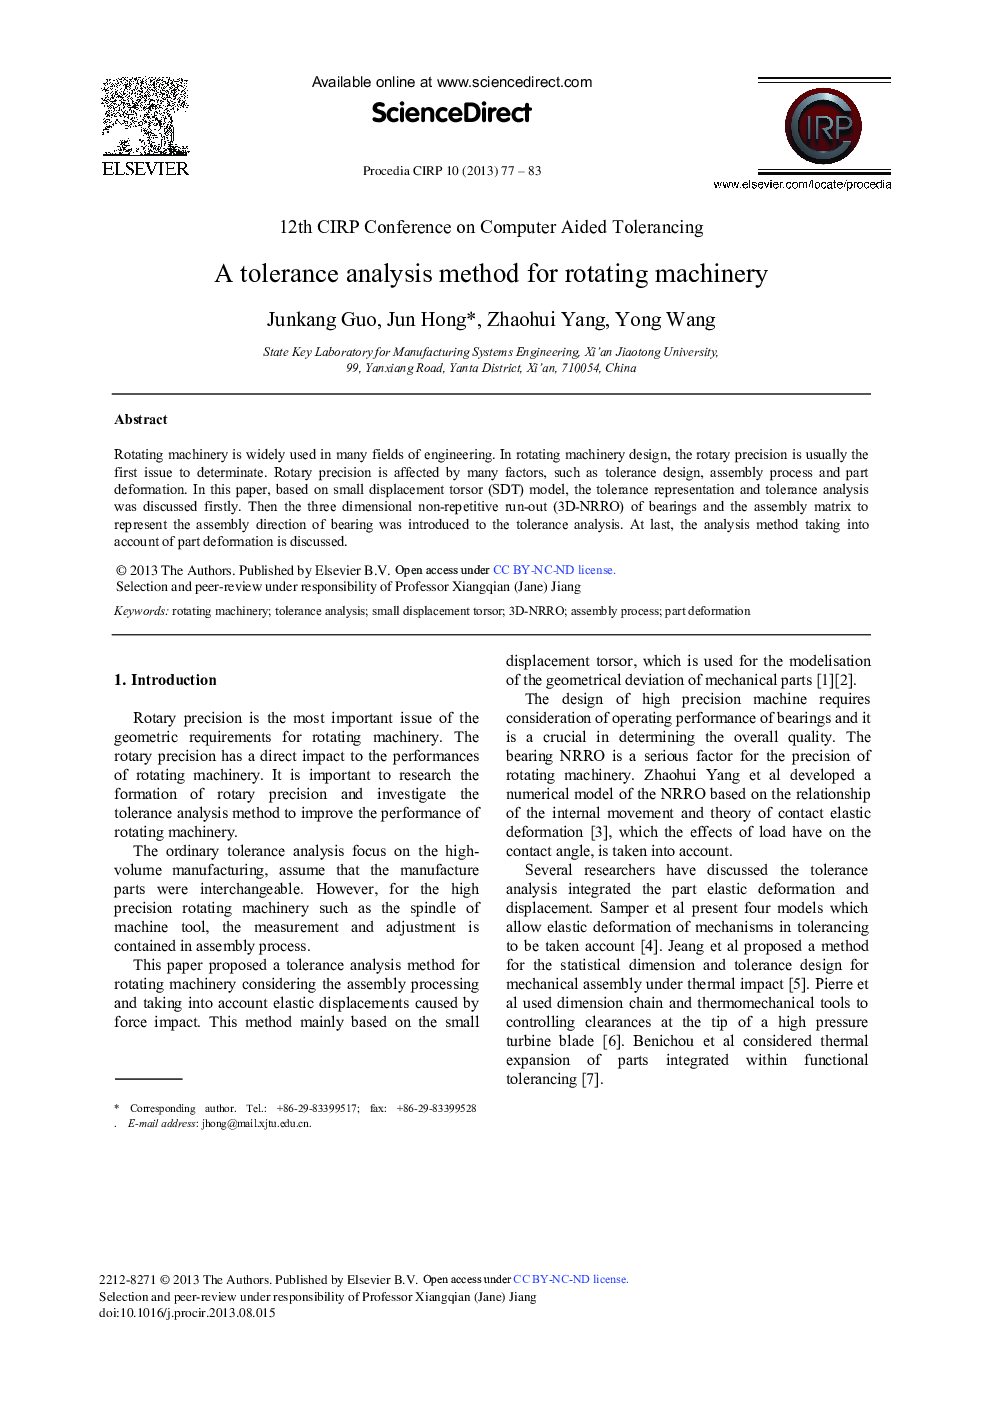 A Tolerance Analysis Method for Rotating Machinery